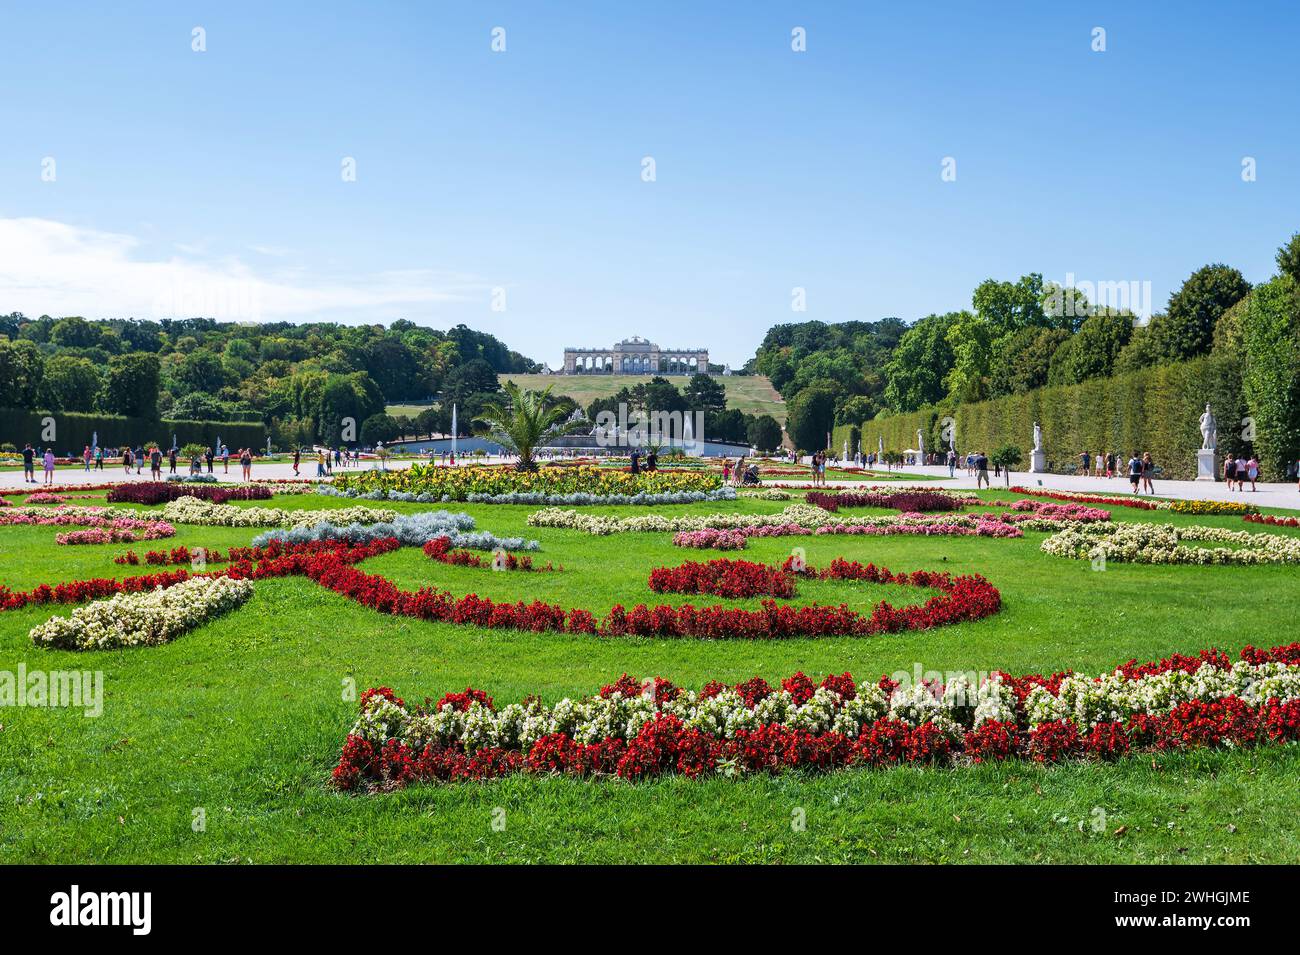 Vienna, Austria - August 12, 2022: Blooming garden in Schonbrunn Palace, the magnificent summer residence of the Habsburg rulers in Vienna. Admire its Stock Photo